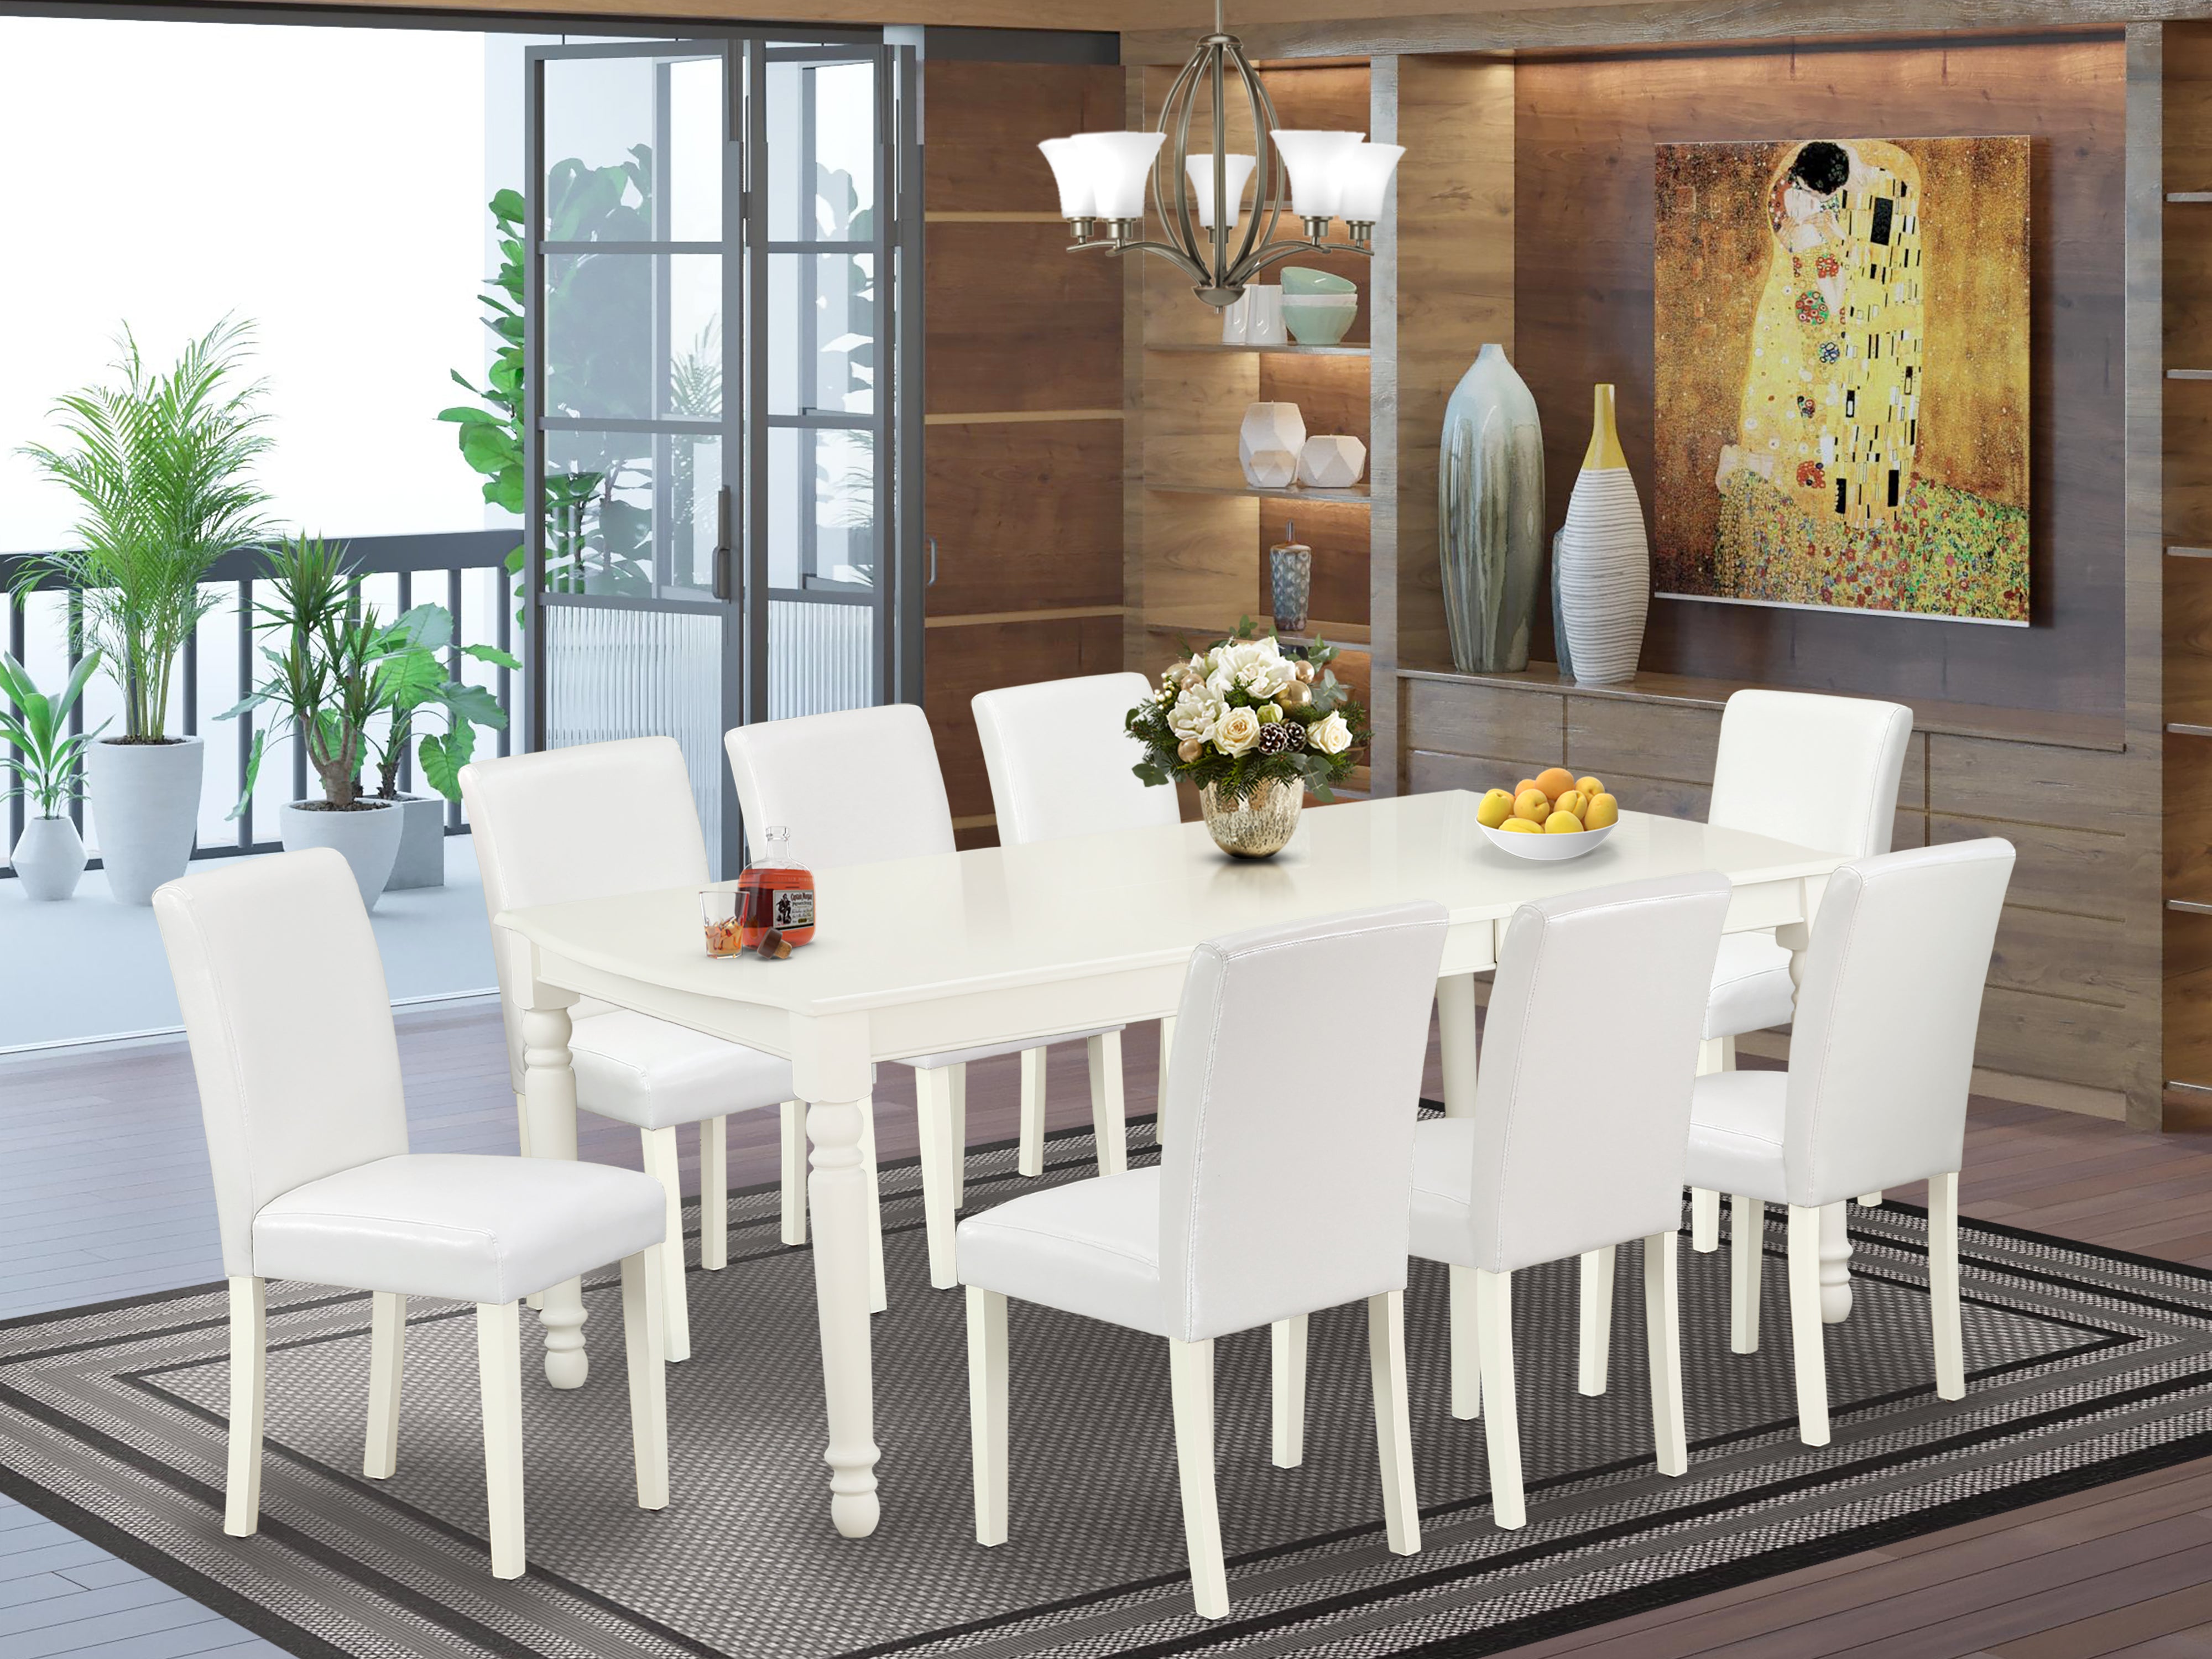 DOAB9-LWH-64 9Pc Rectangle 60/78 Inch Dining Table With 18 In Leaf And 8 Parson Chair With Linen White Leg And Pu Leather Color White